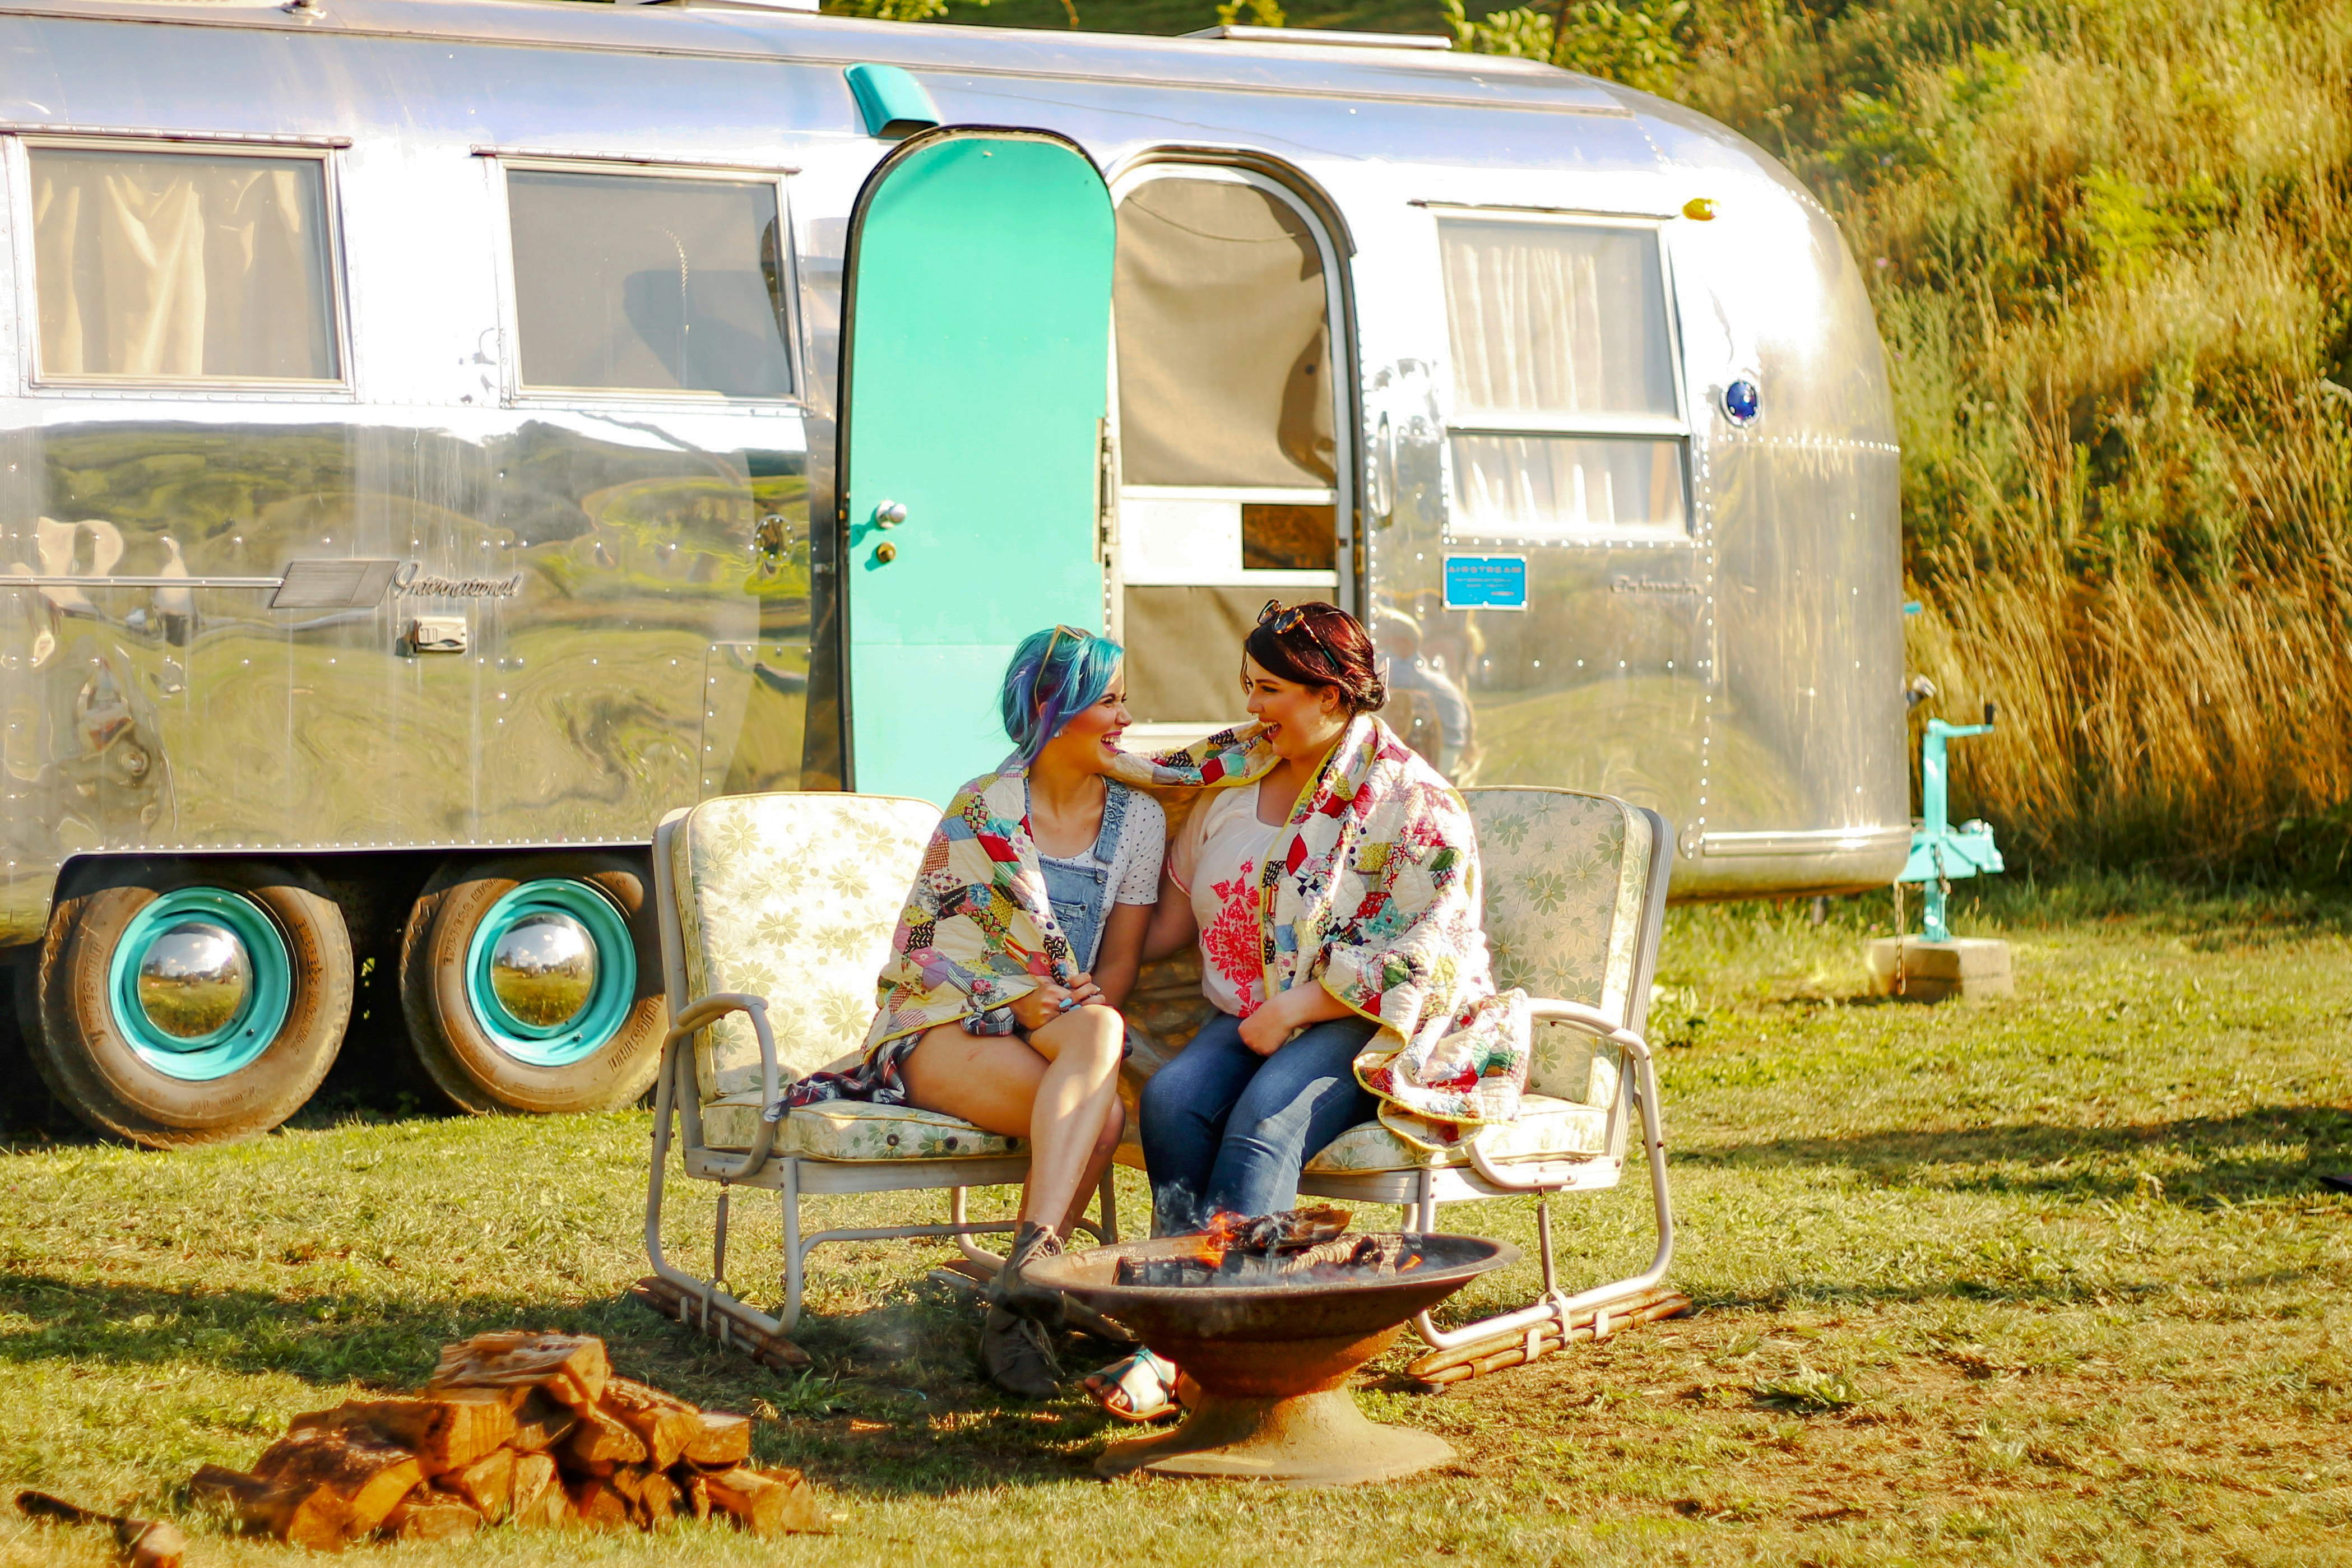 Two women laugh near a campfire while sharing a colorful blanket, with an Airstream trailer in the background